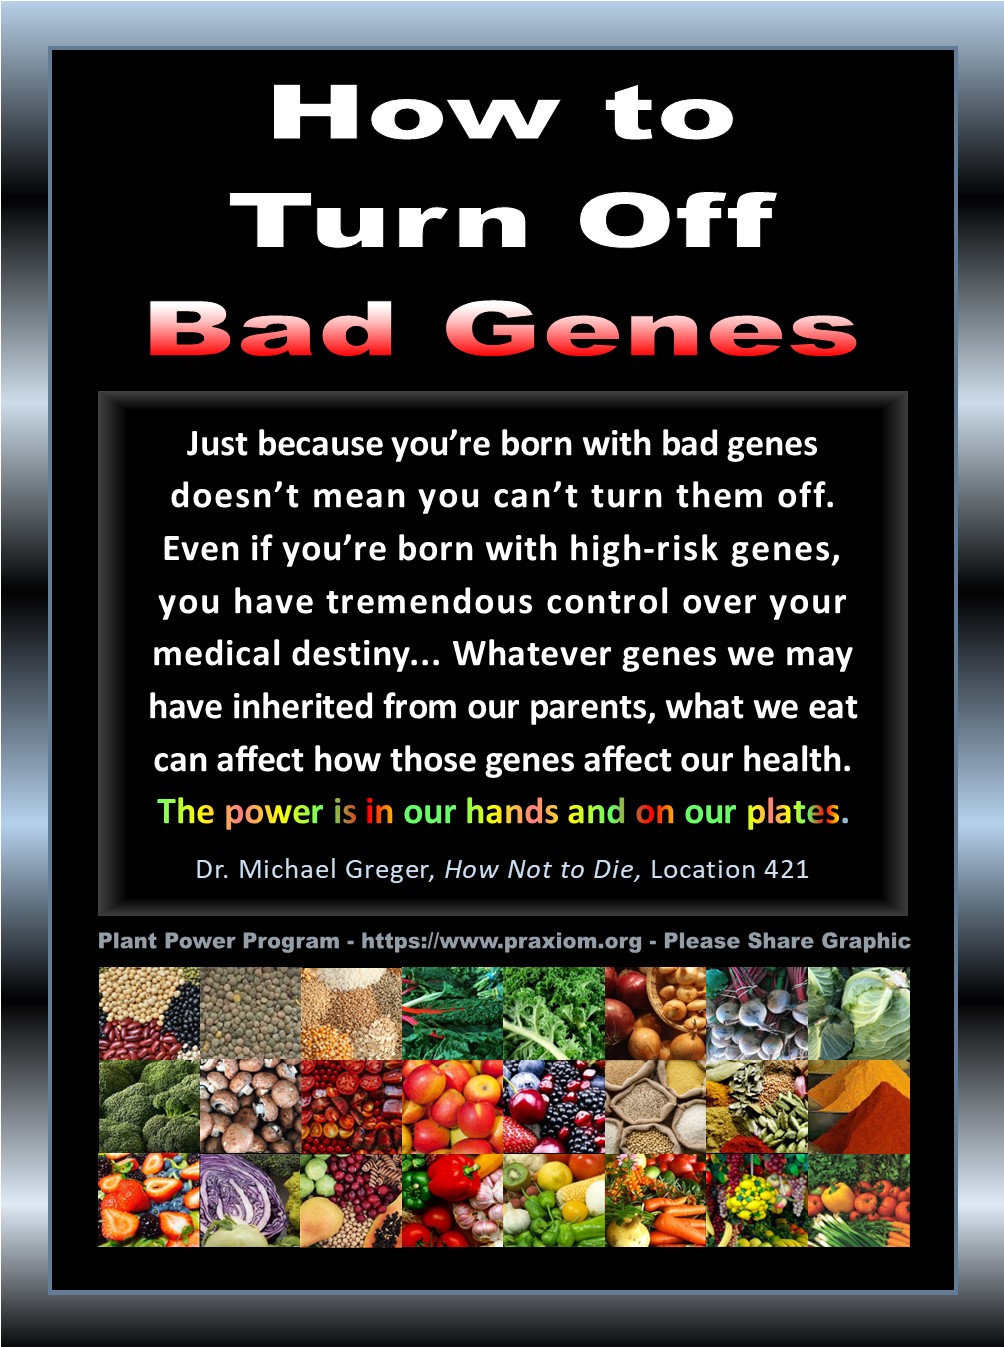 You Can Turn Off Bad Genes - Dr. Michael Greger